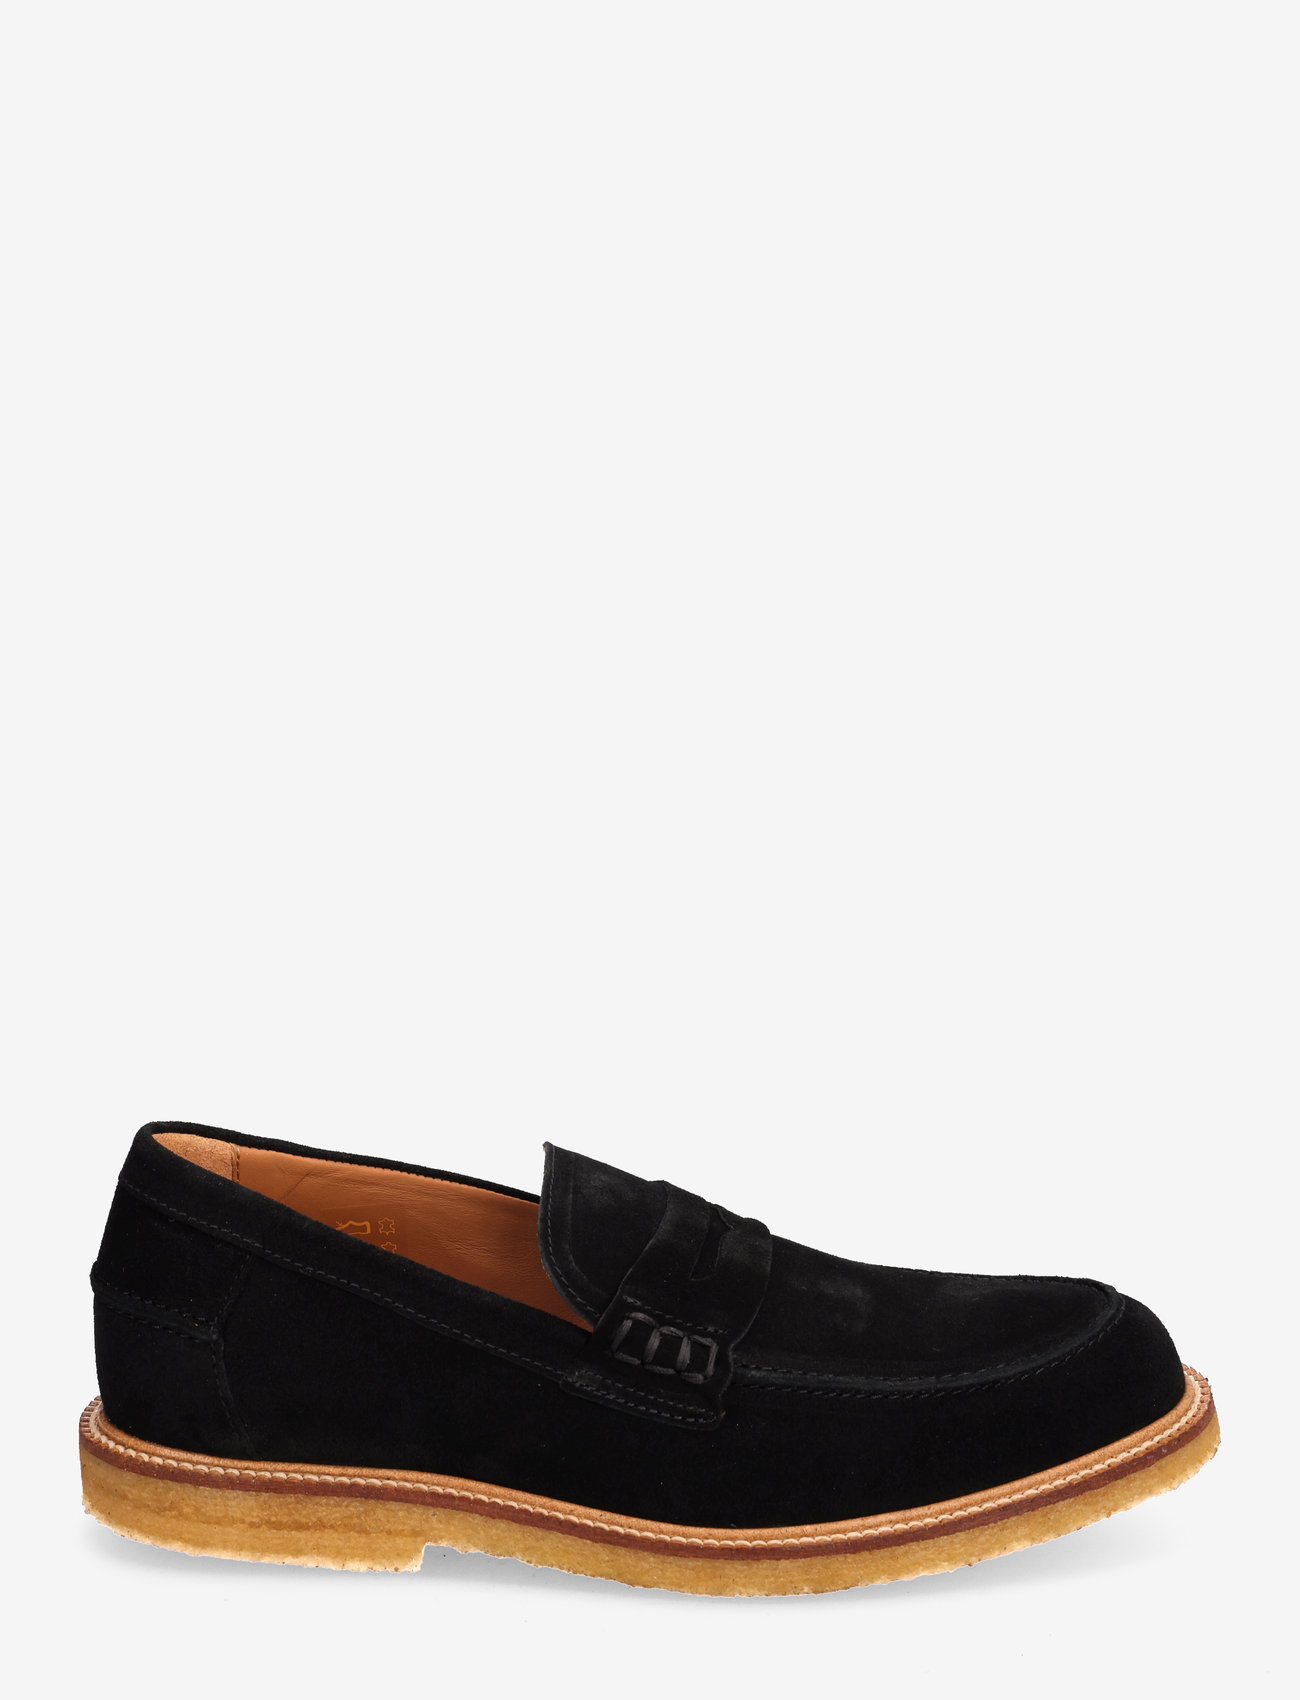 ANGULUS - Loafer - nordic style - 1163 black - 1